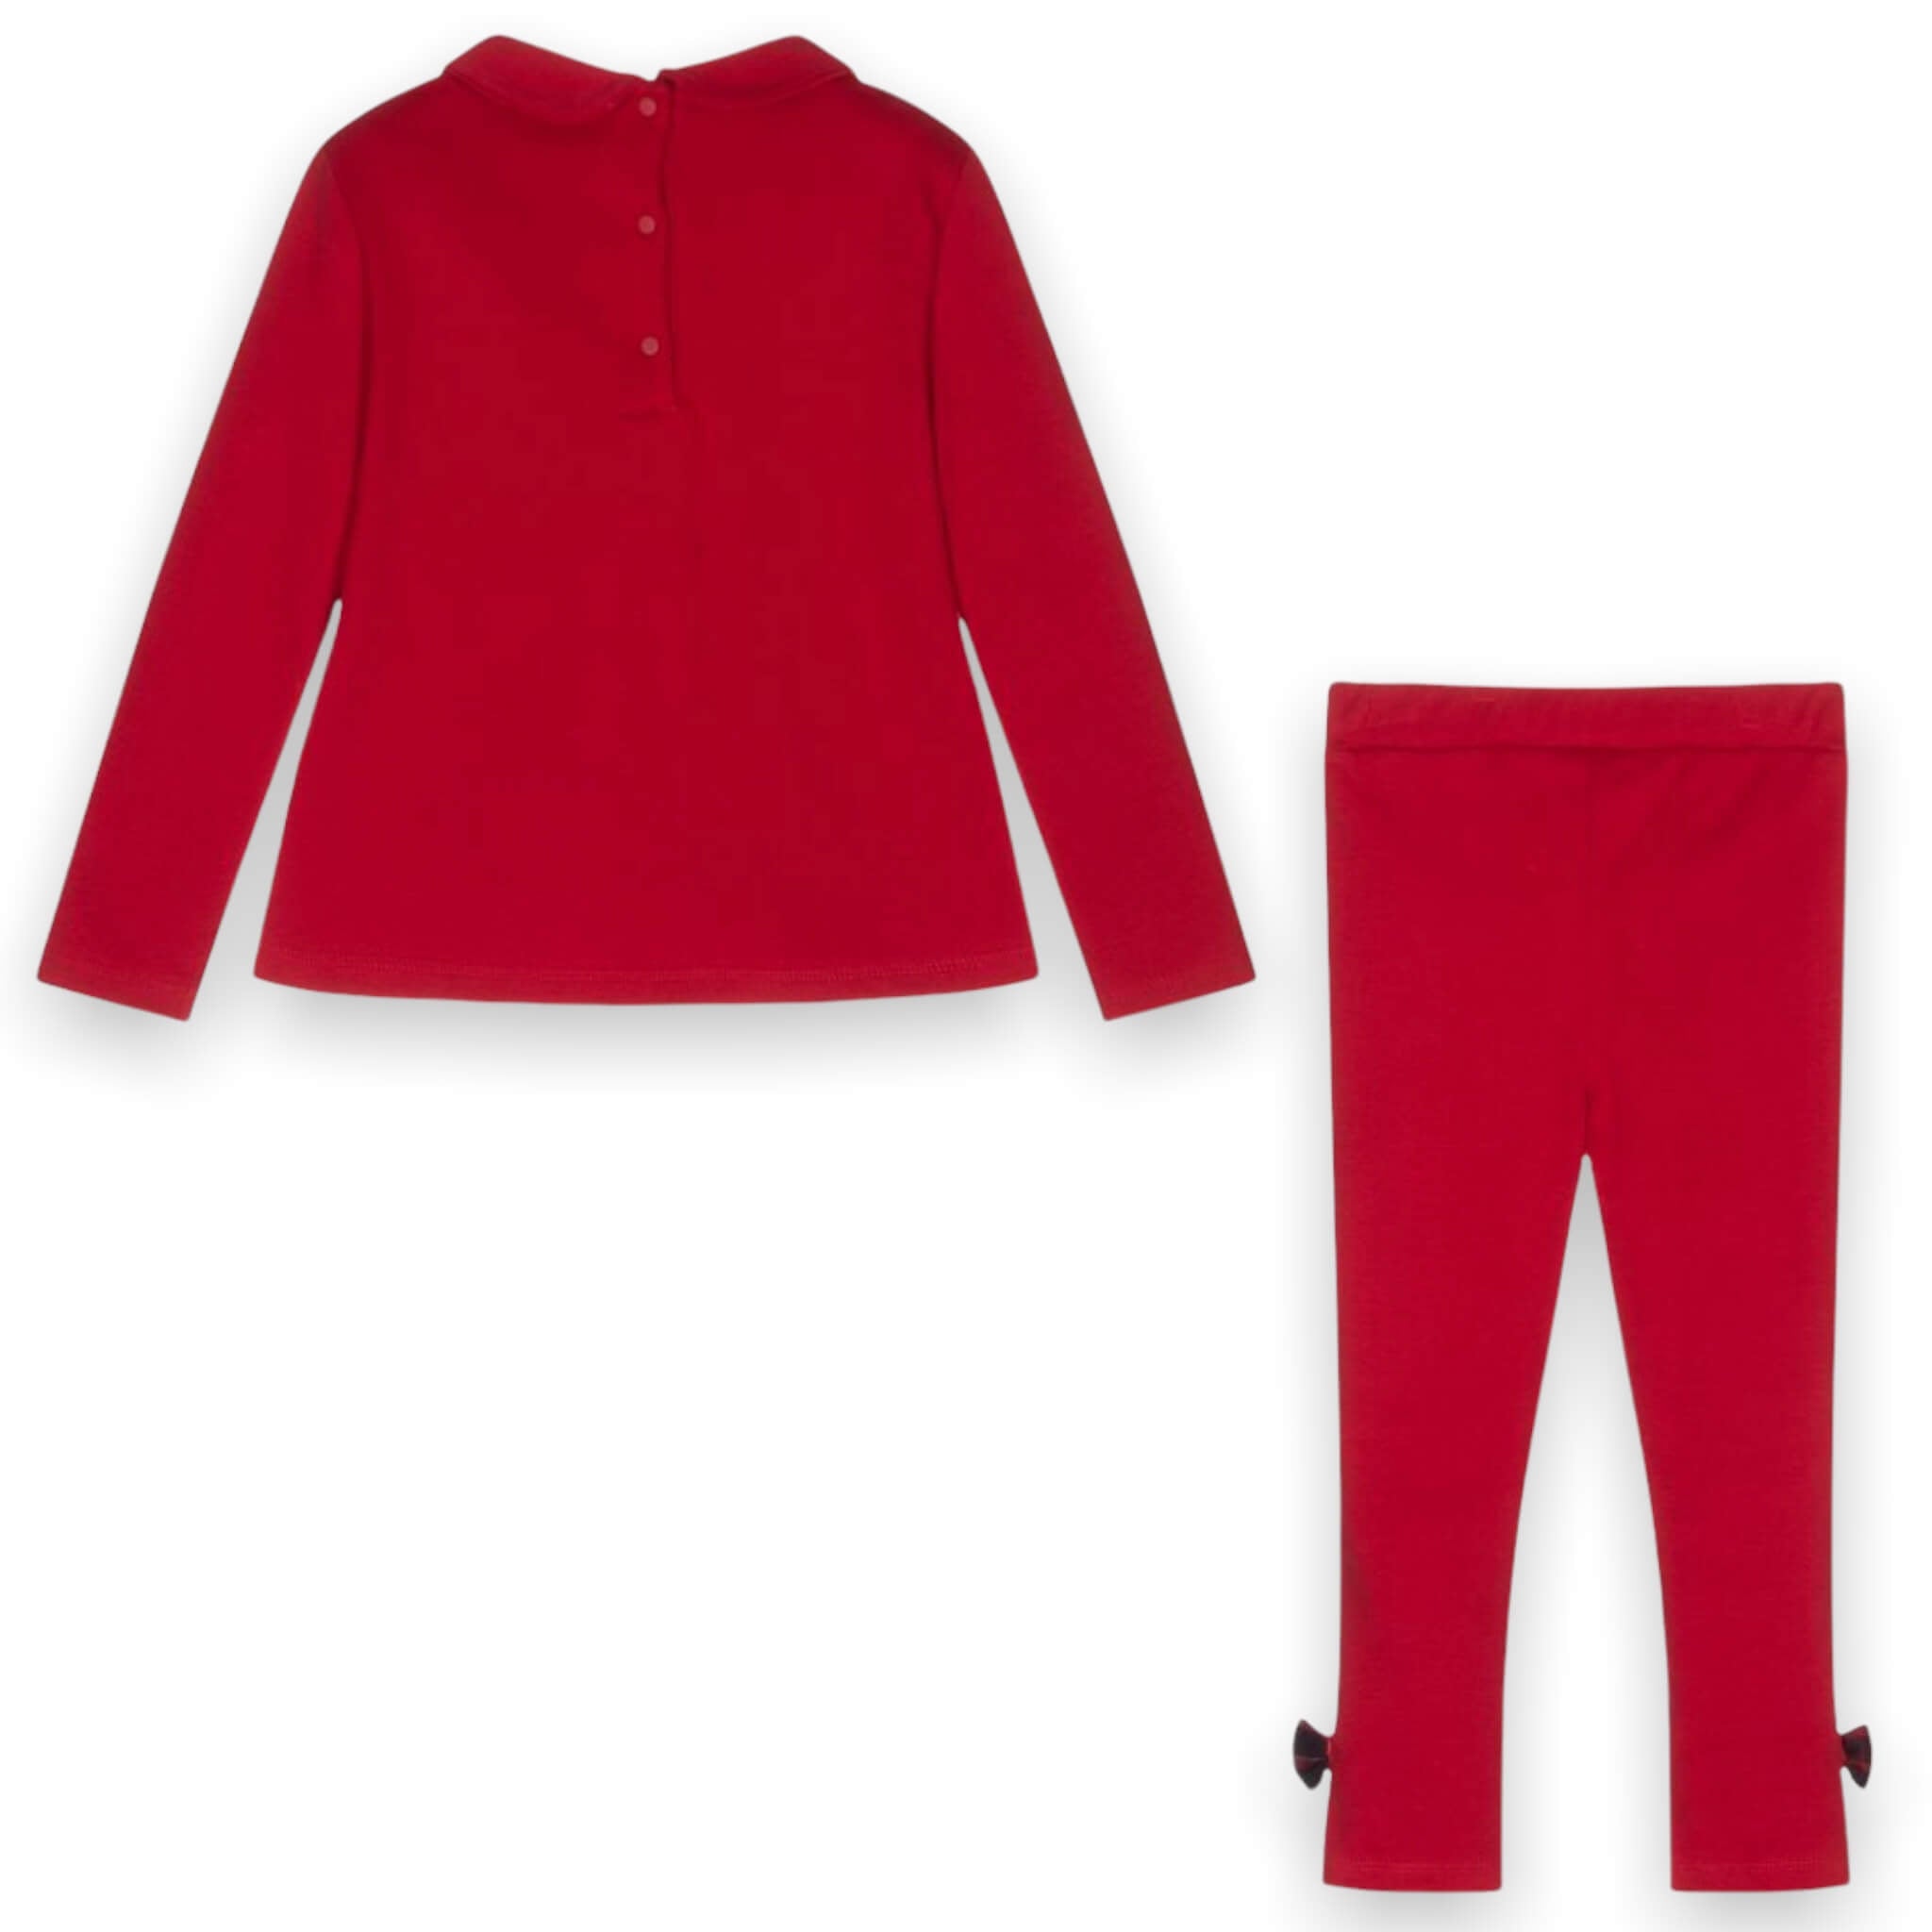 patachou girls red legging outfit 